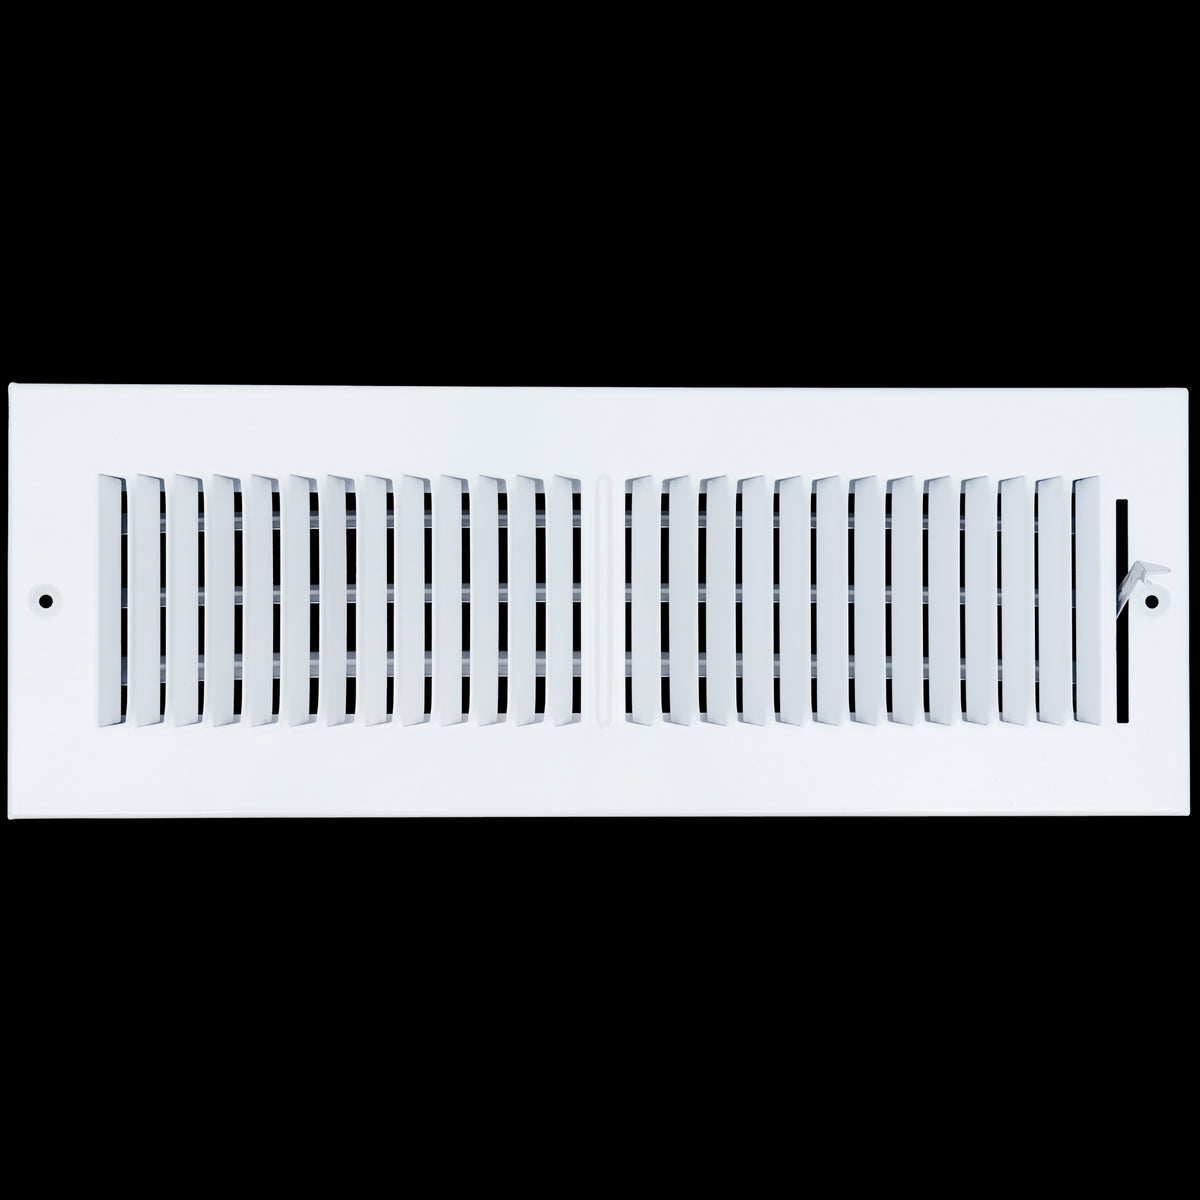 airgrilles 14 x 4 duct opening  -  2 way steel air supply diffuser for sidewall and ceiling hnd-asg-wh-2way-14x4 764613097764 - 1